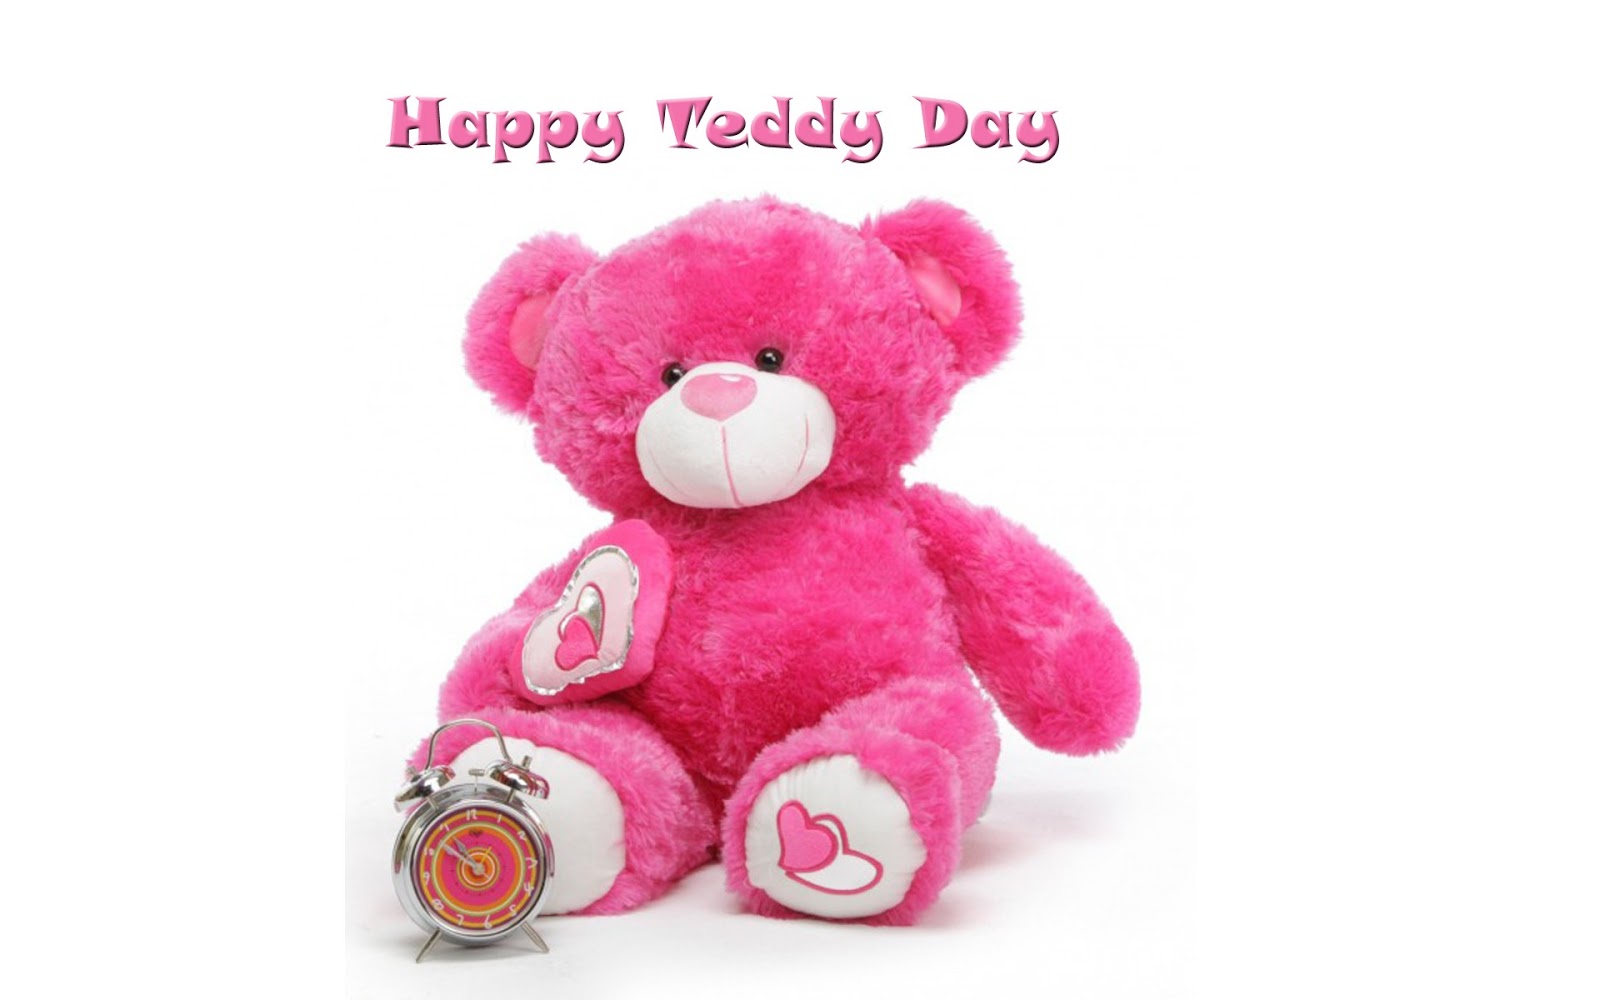 teddy day images hd